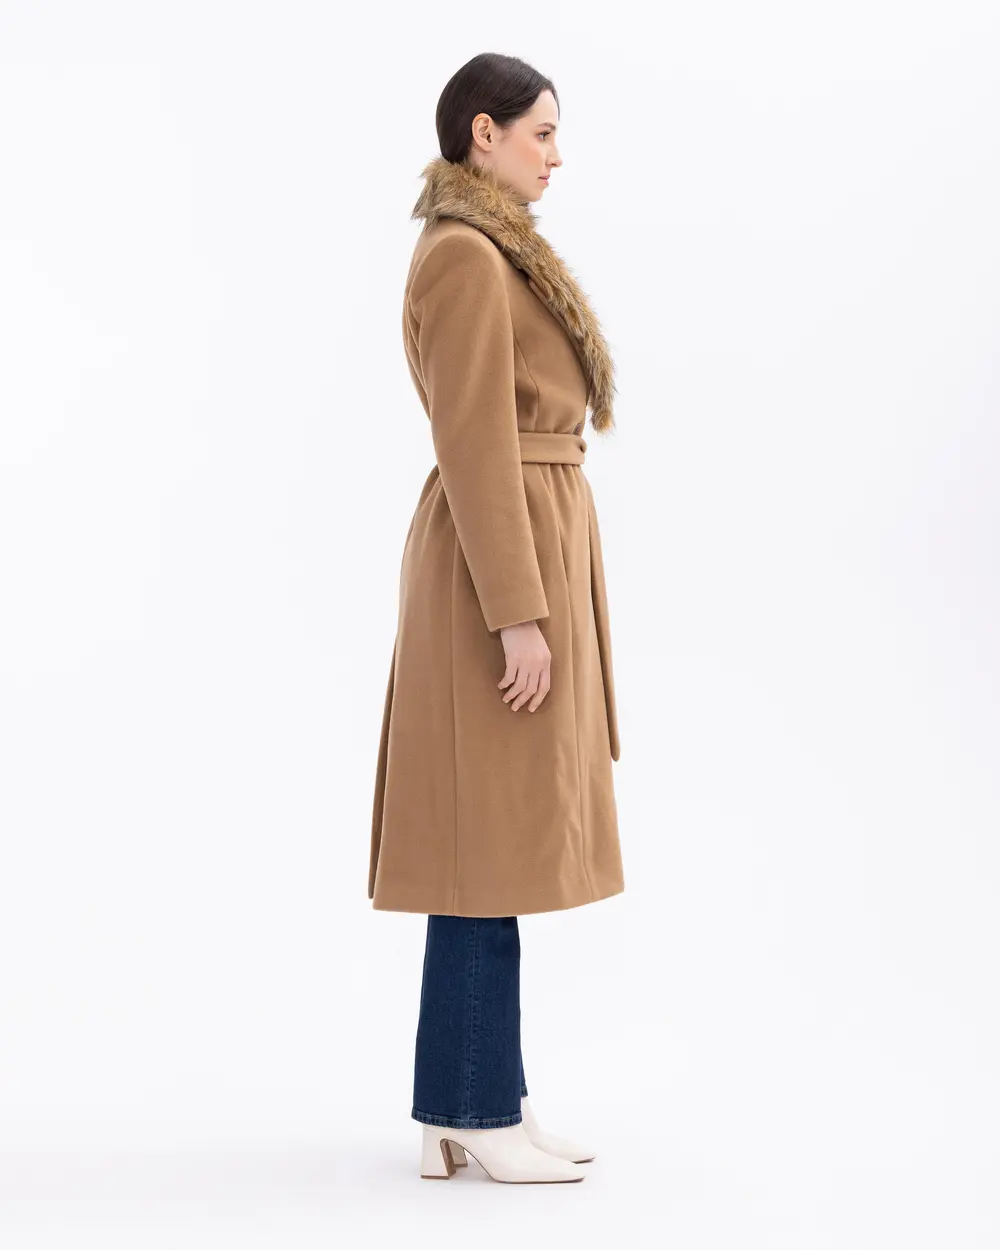 Belted Faux Leather Trench Coat - SecilStore